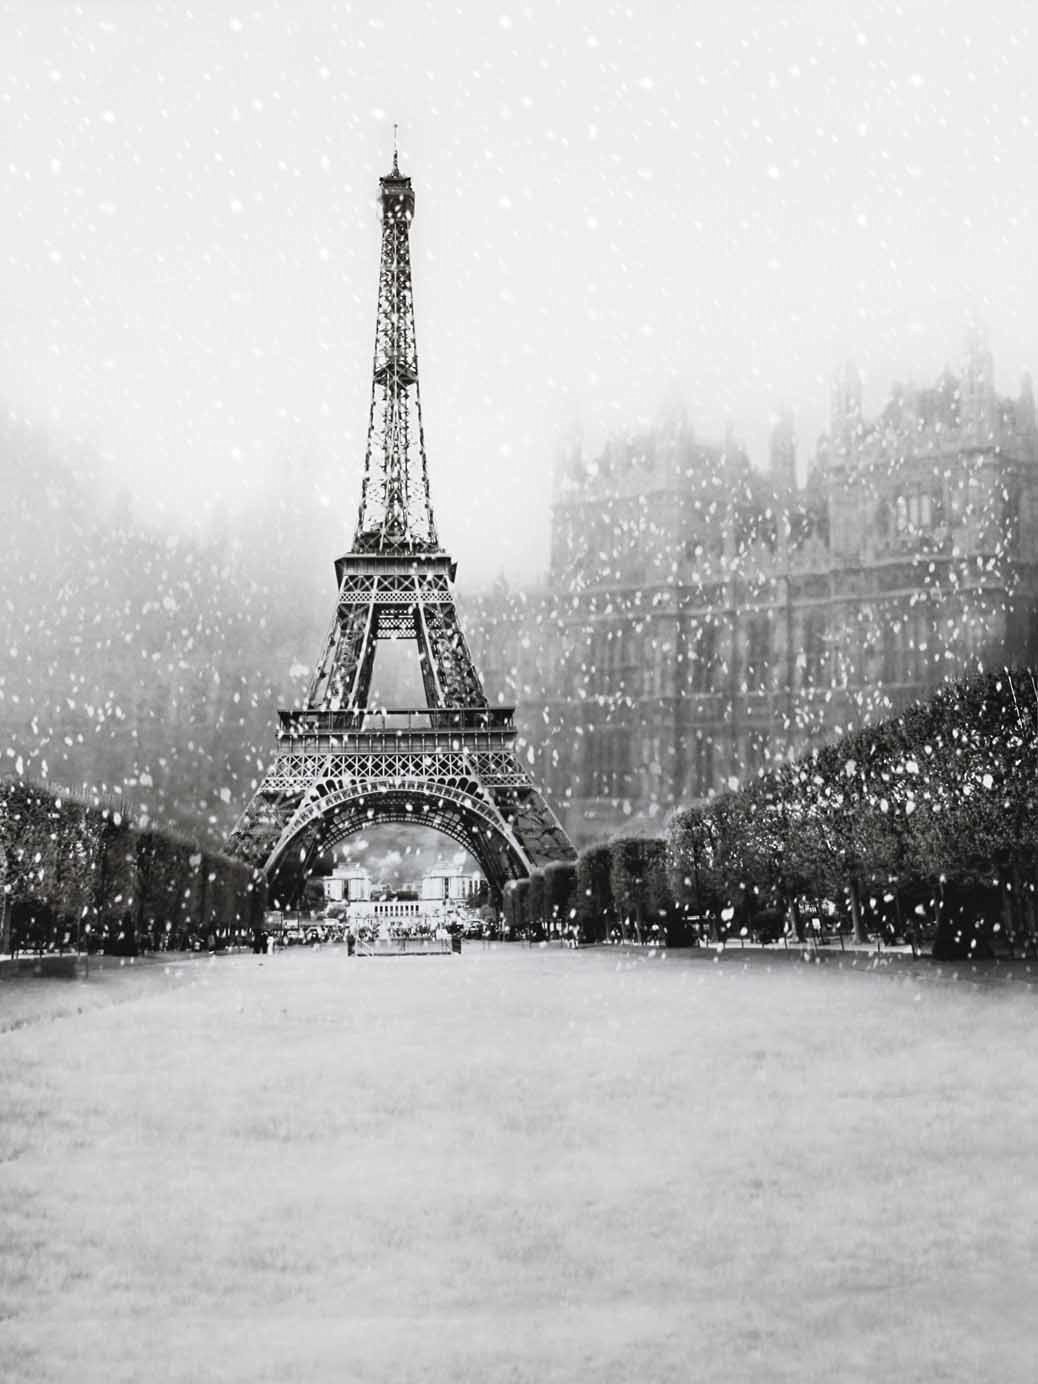 Buy Snow Winter Paris Eiffel Tower Background Photography Snowy City Scenic Photographic Backdrops Christmas Romantic Booth Studio Picture Wallpaper in Cheap Price on Alibaba.com